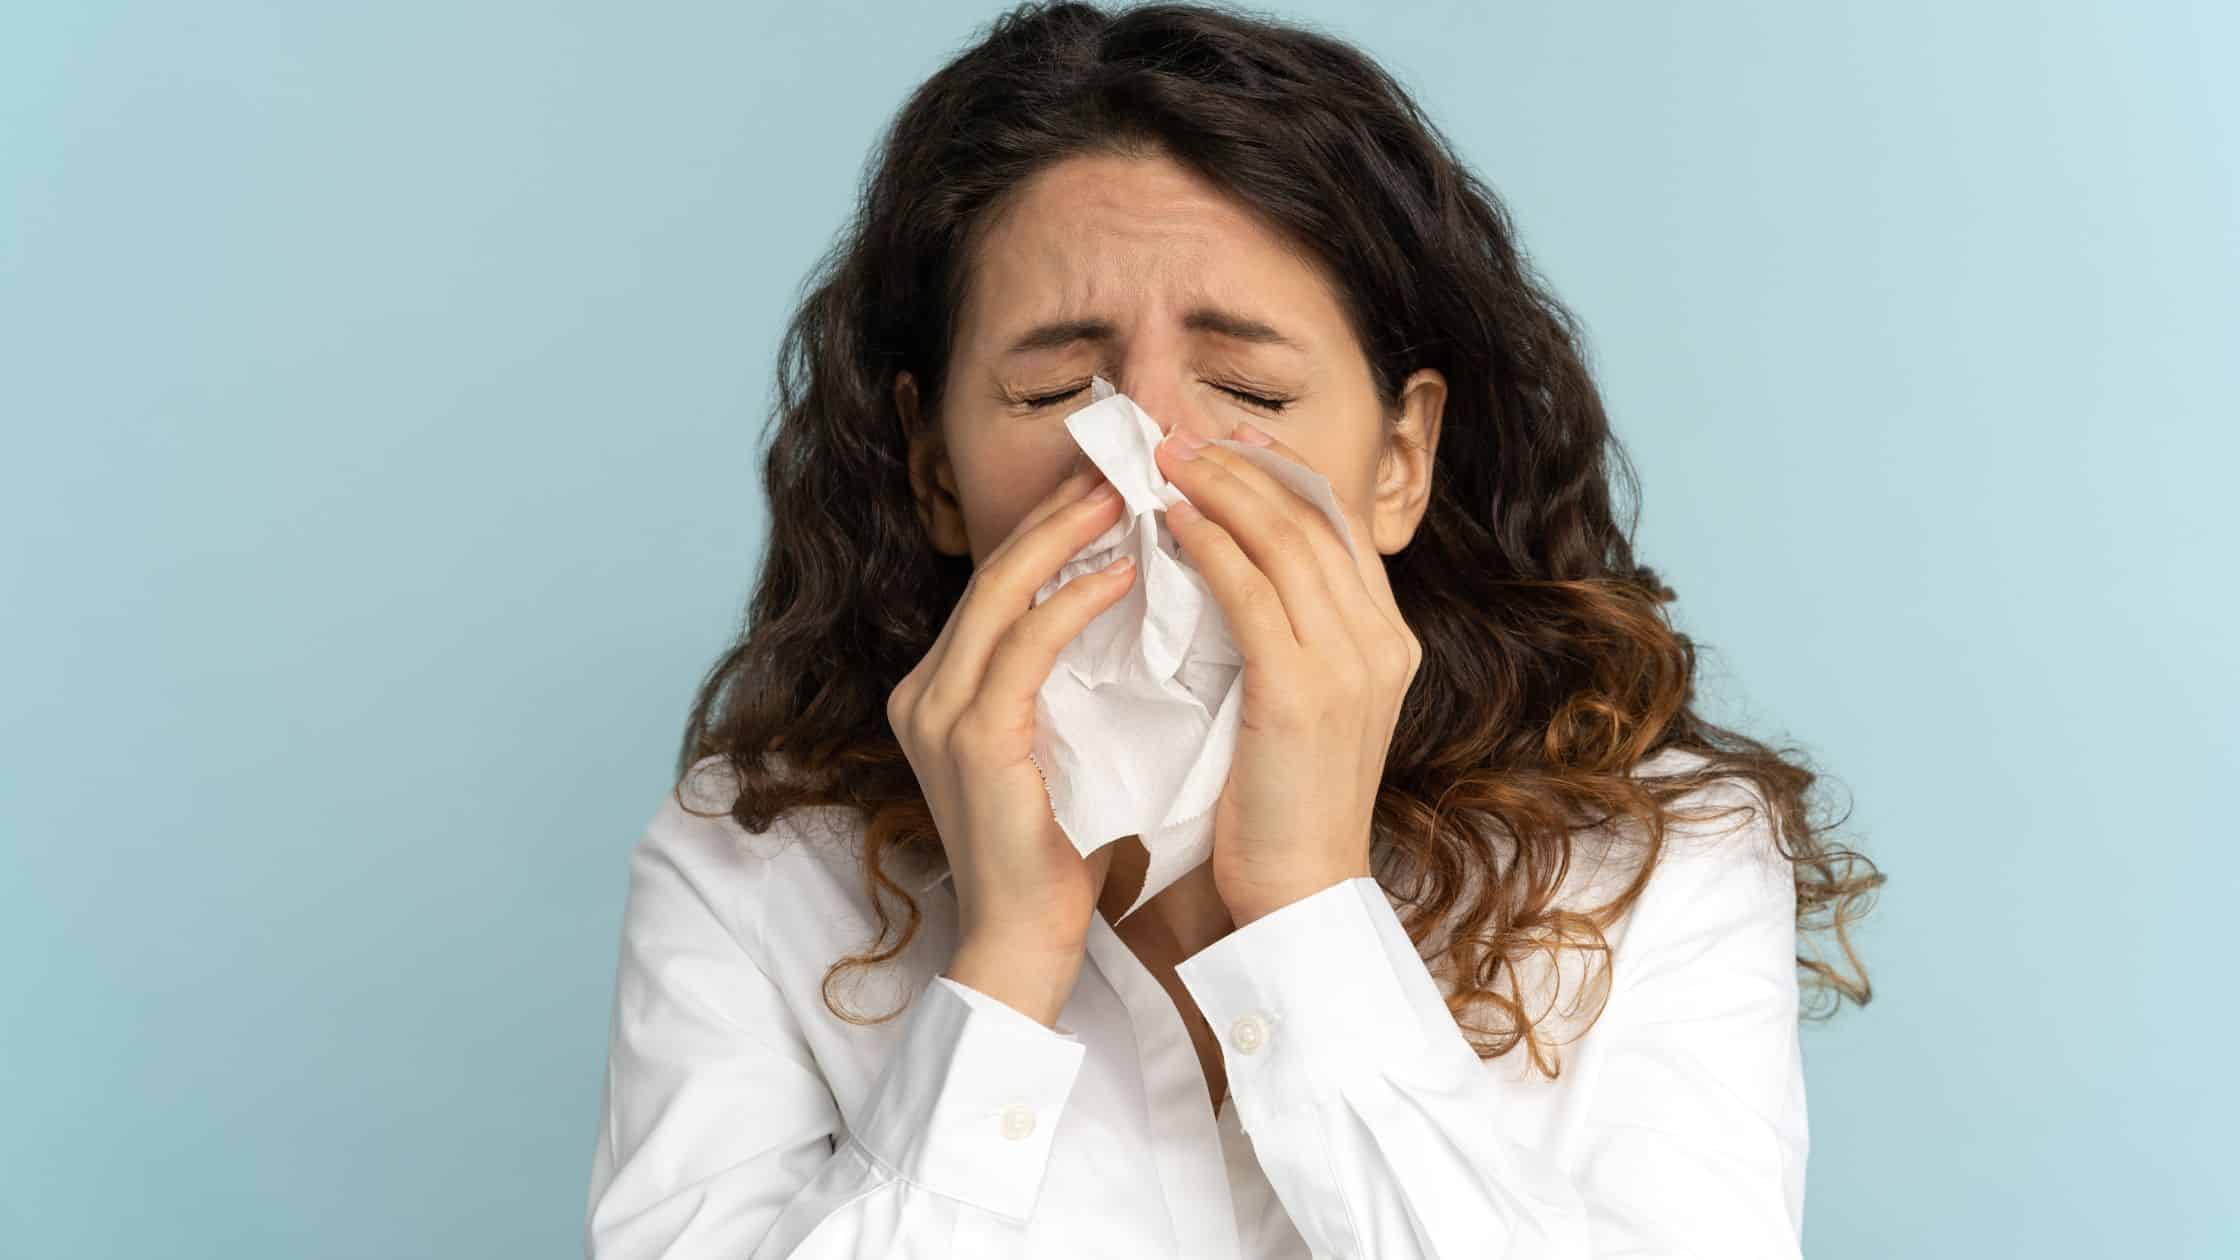 Signs You Need Better Air Quality At Home